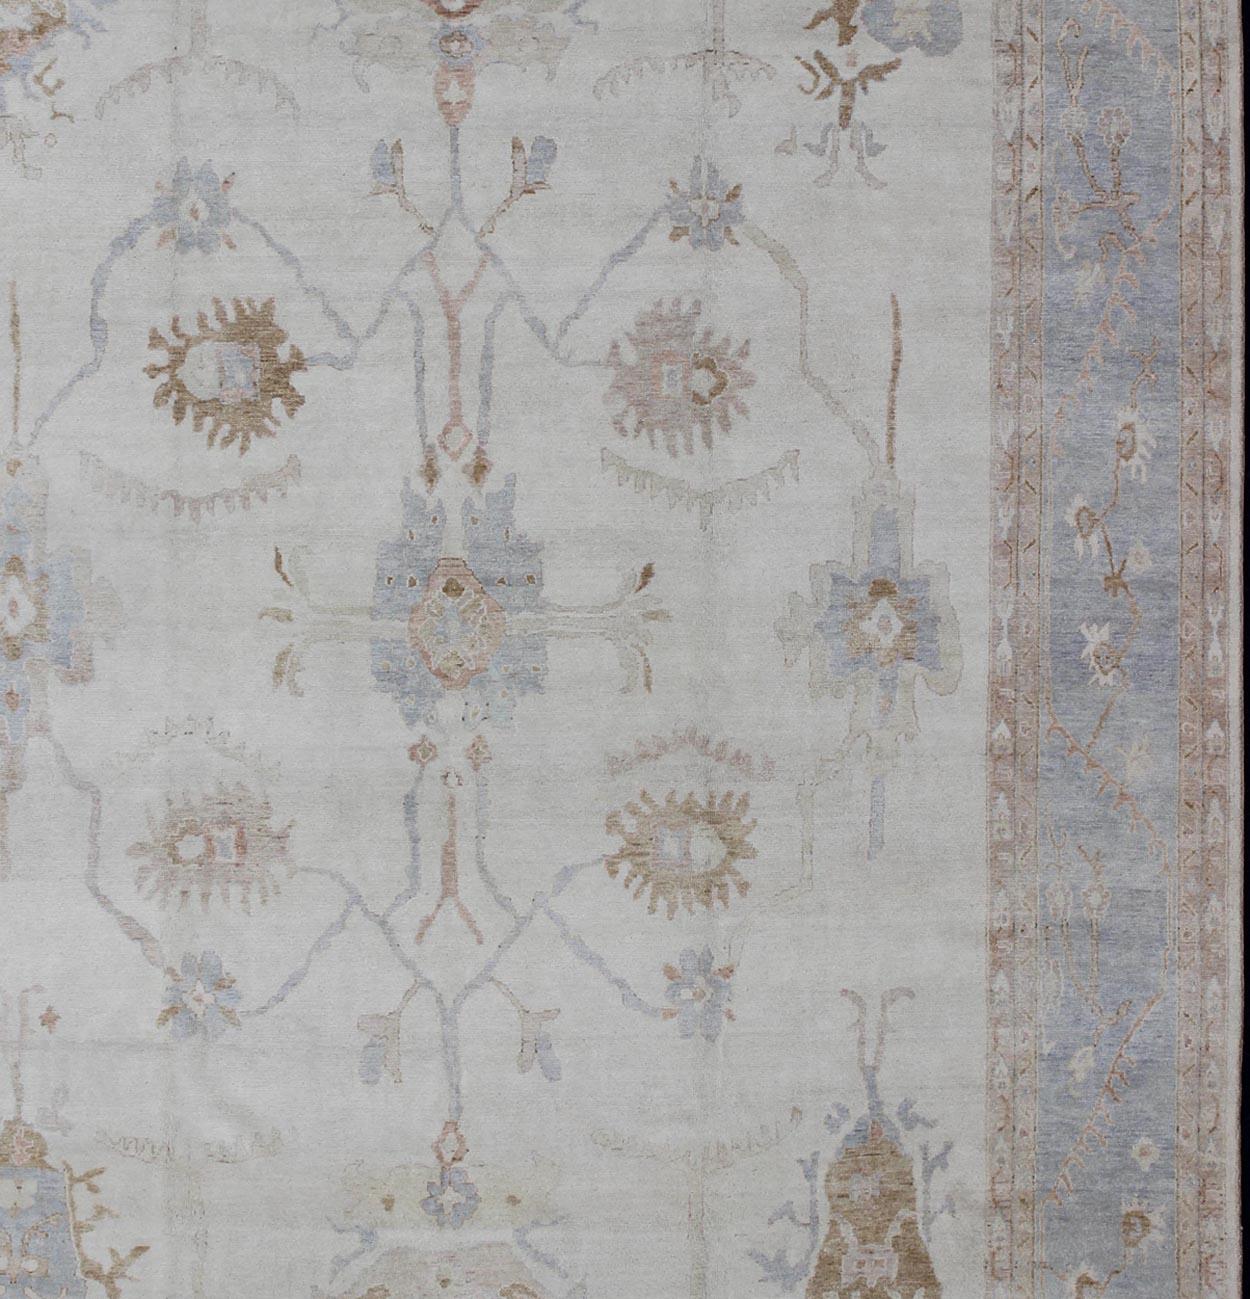 Large Oushak hand knotted rug in light blue, ivory/white & light brown, Rug/BDH-711387 , country of origin / type: India / Oushak

Measures: 11'8 x 15'7.